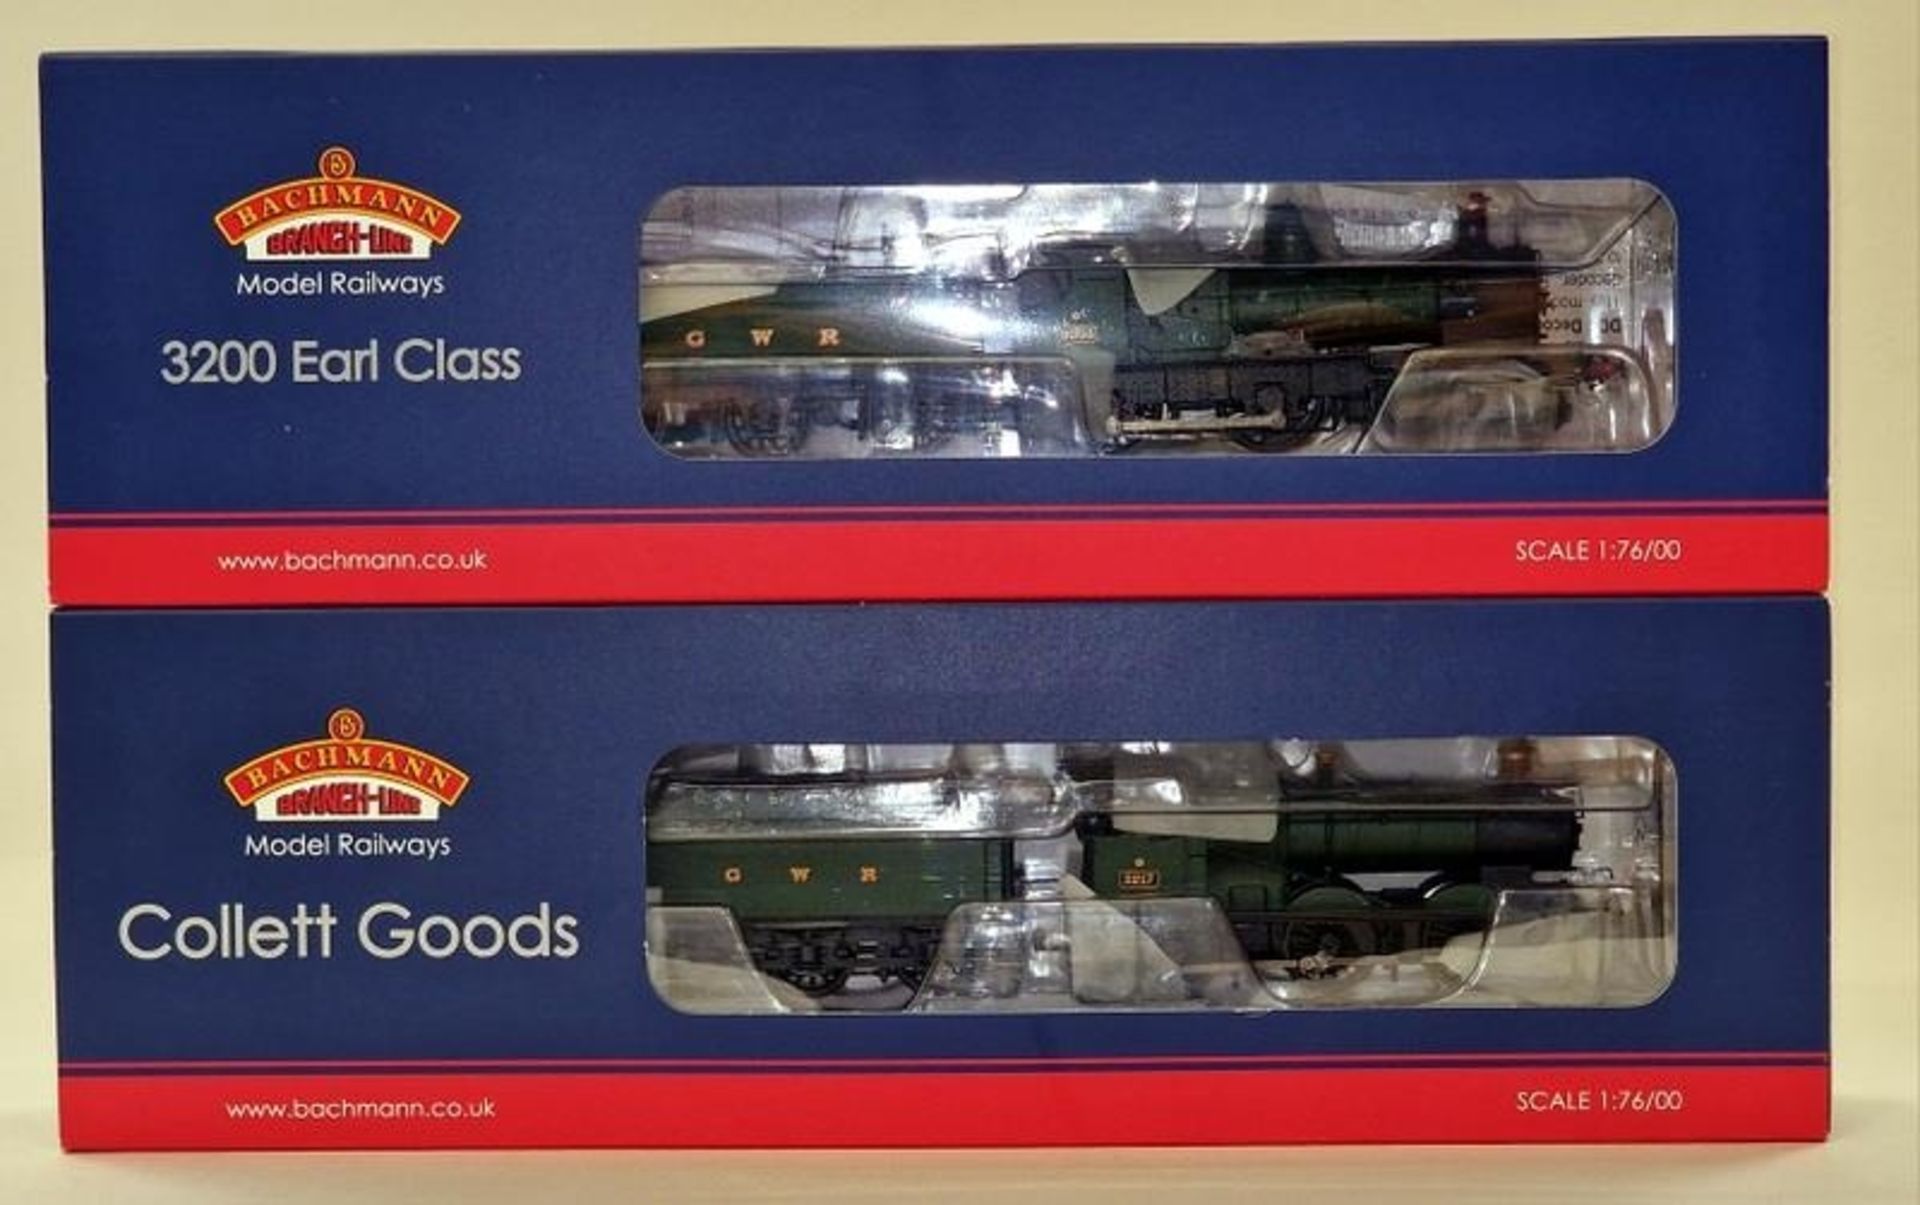 Bachmann OO Gauge 32-310 Collett Goods 3217 locomotive and tender together with 31-087DC GWR 3200